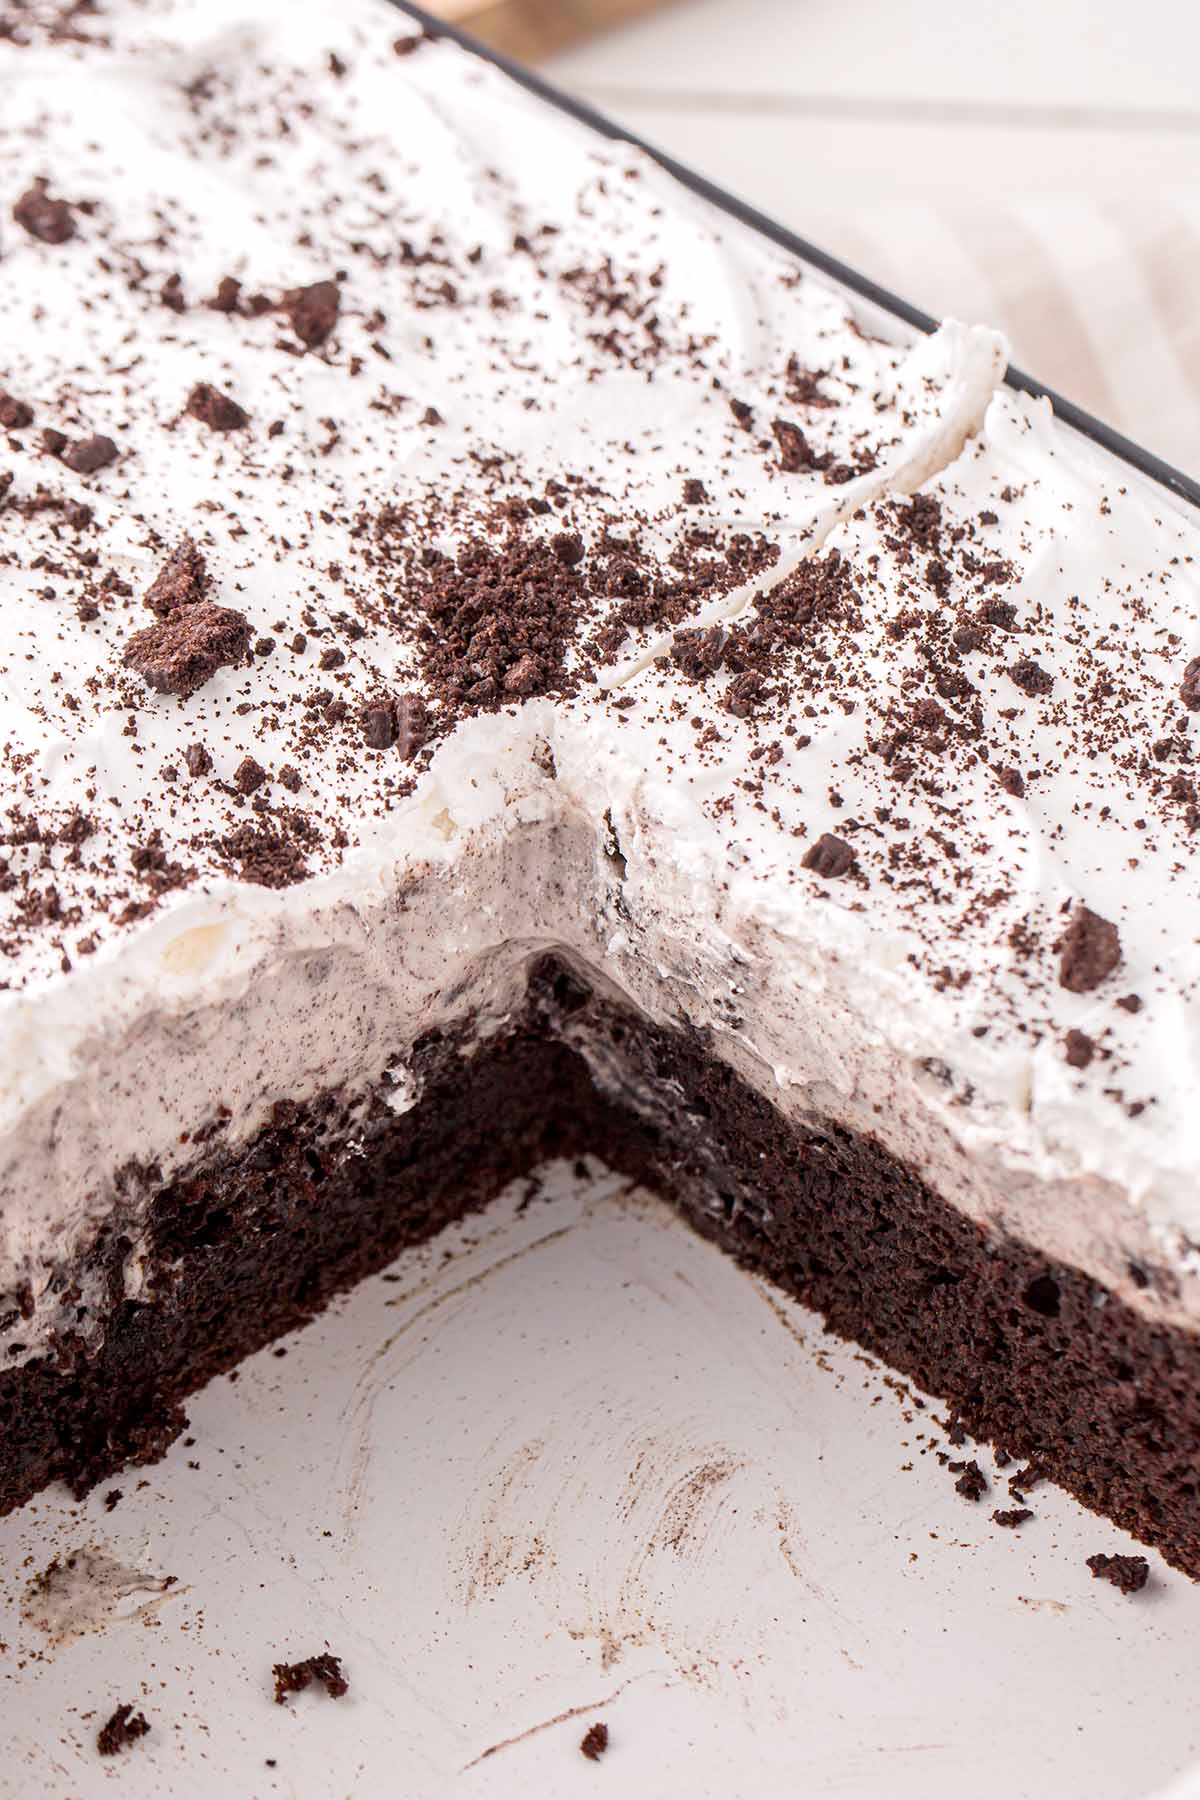 showing the inside of Cookies and Cream Poke Cake